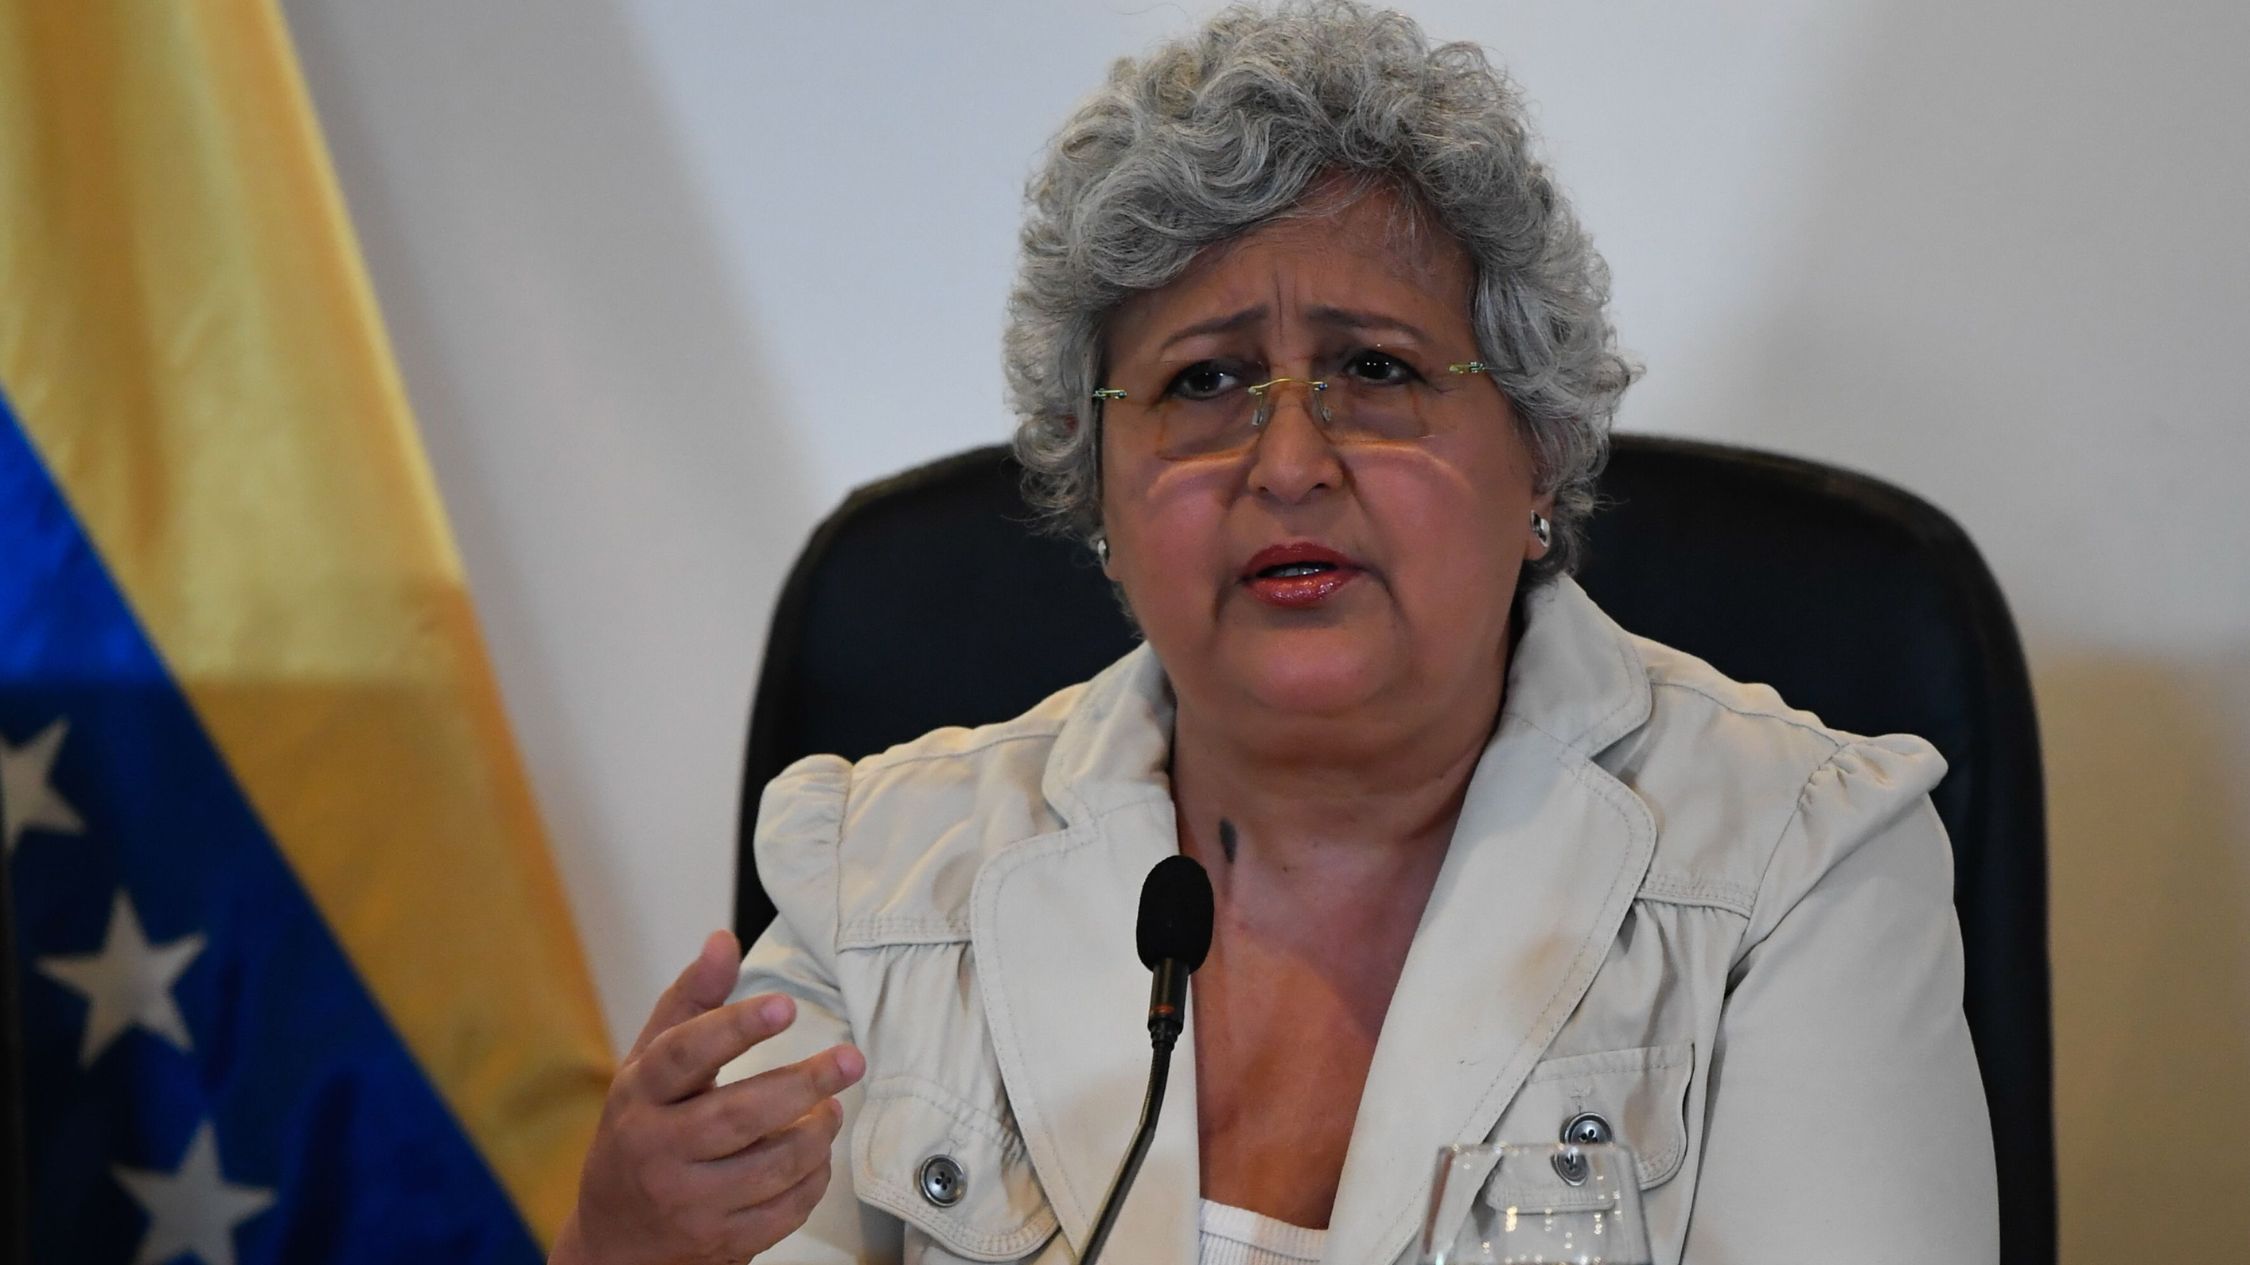 Tibisay Lucena, former president of Venezuela’s CNE, has died, the government said